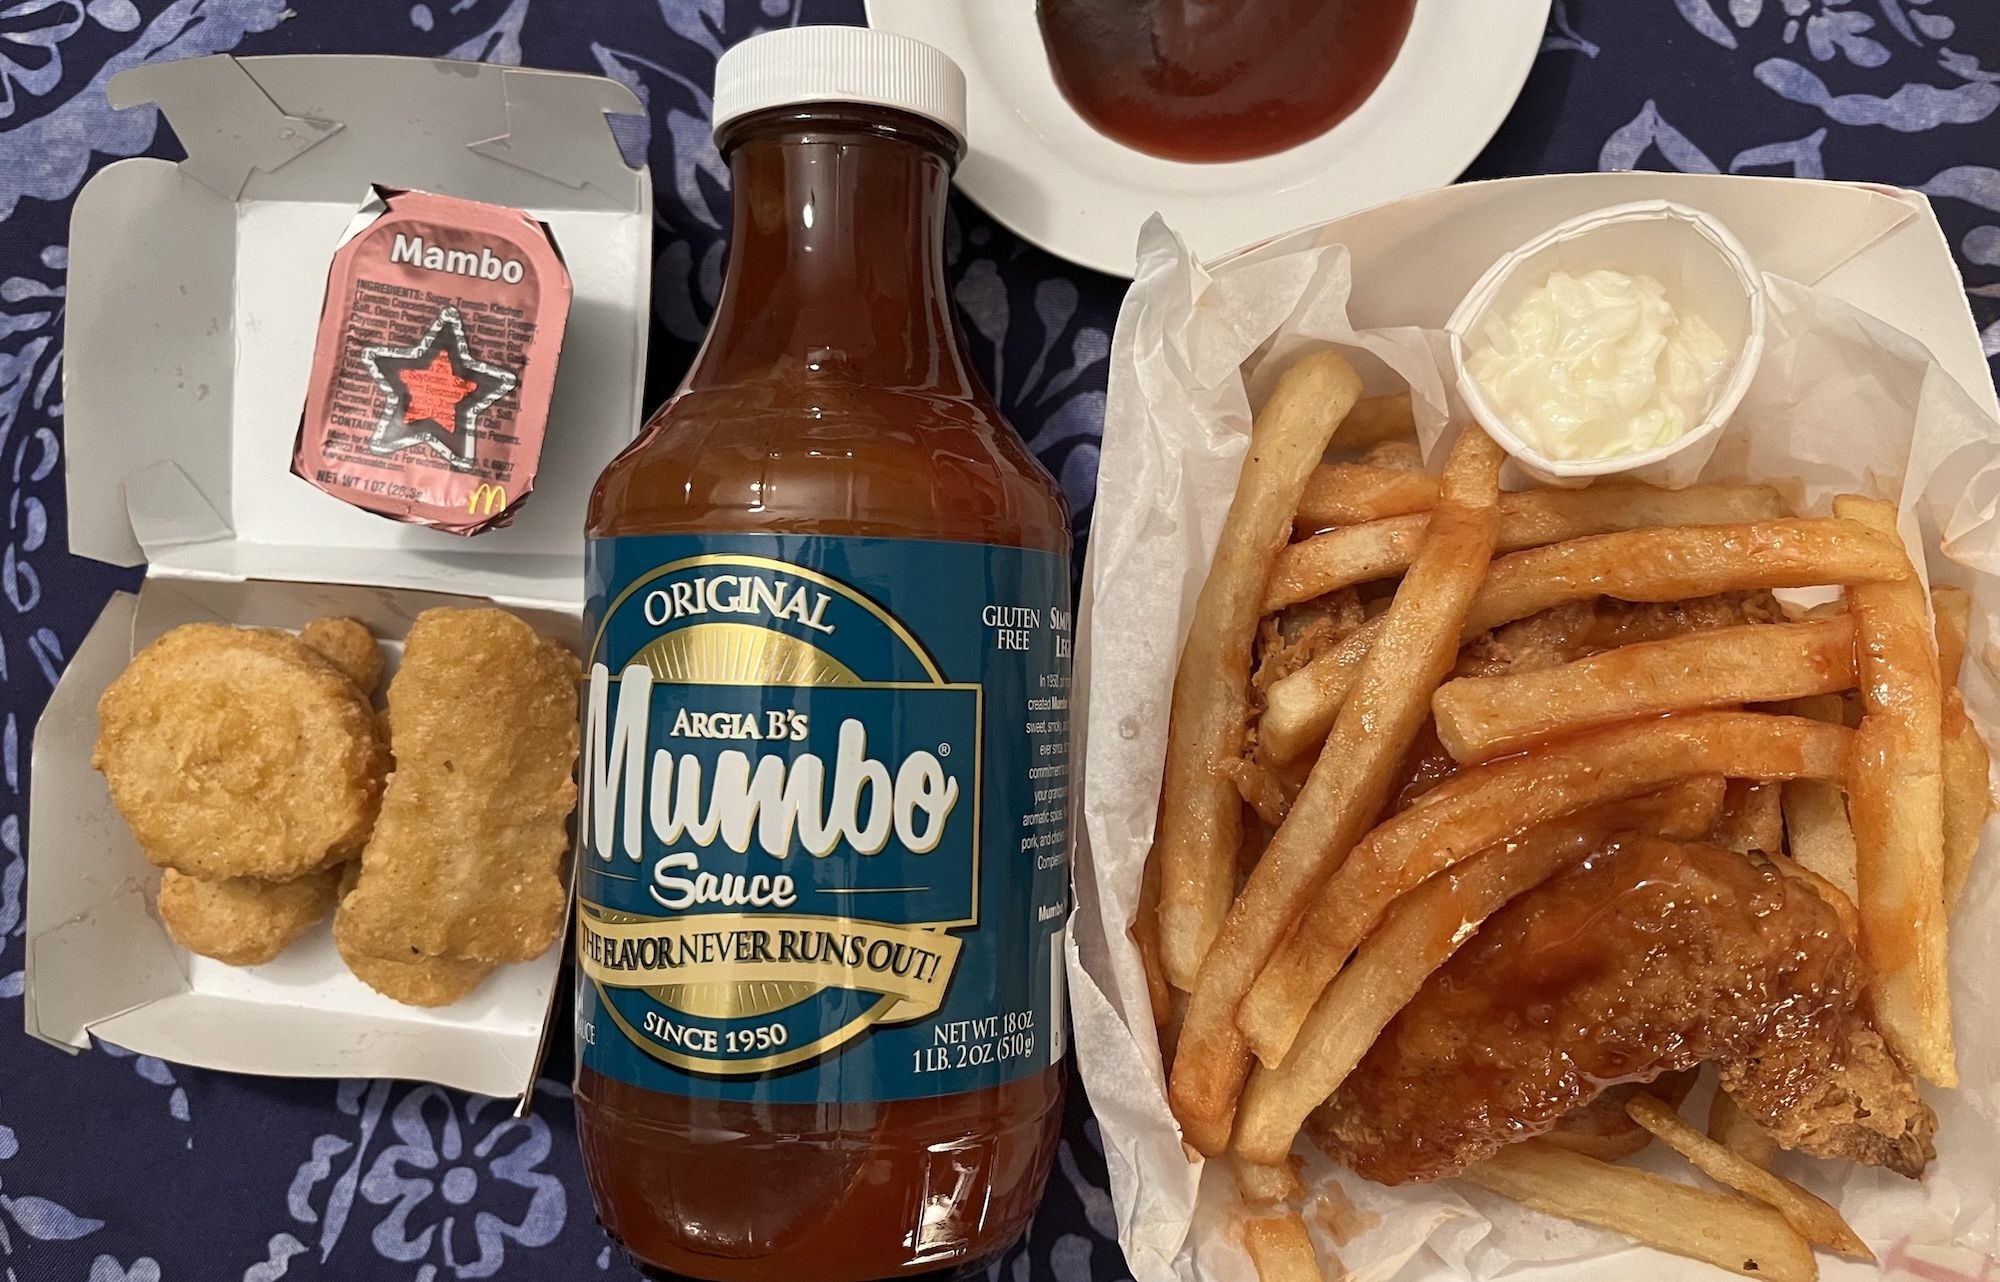 Chicken nuggets next to bottle of Mumbo sauce next to french fries and chicken wings.